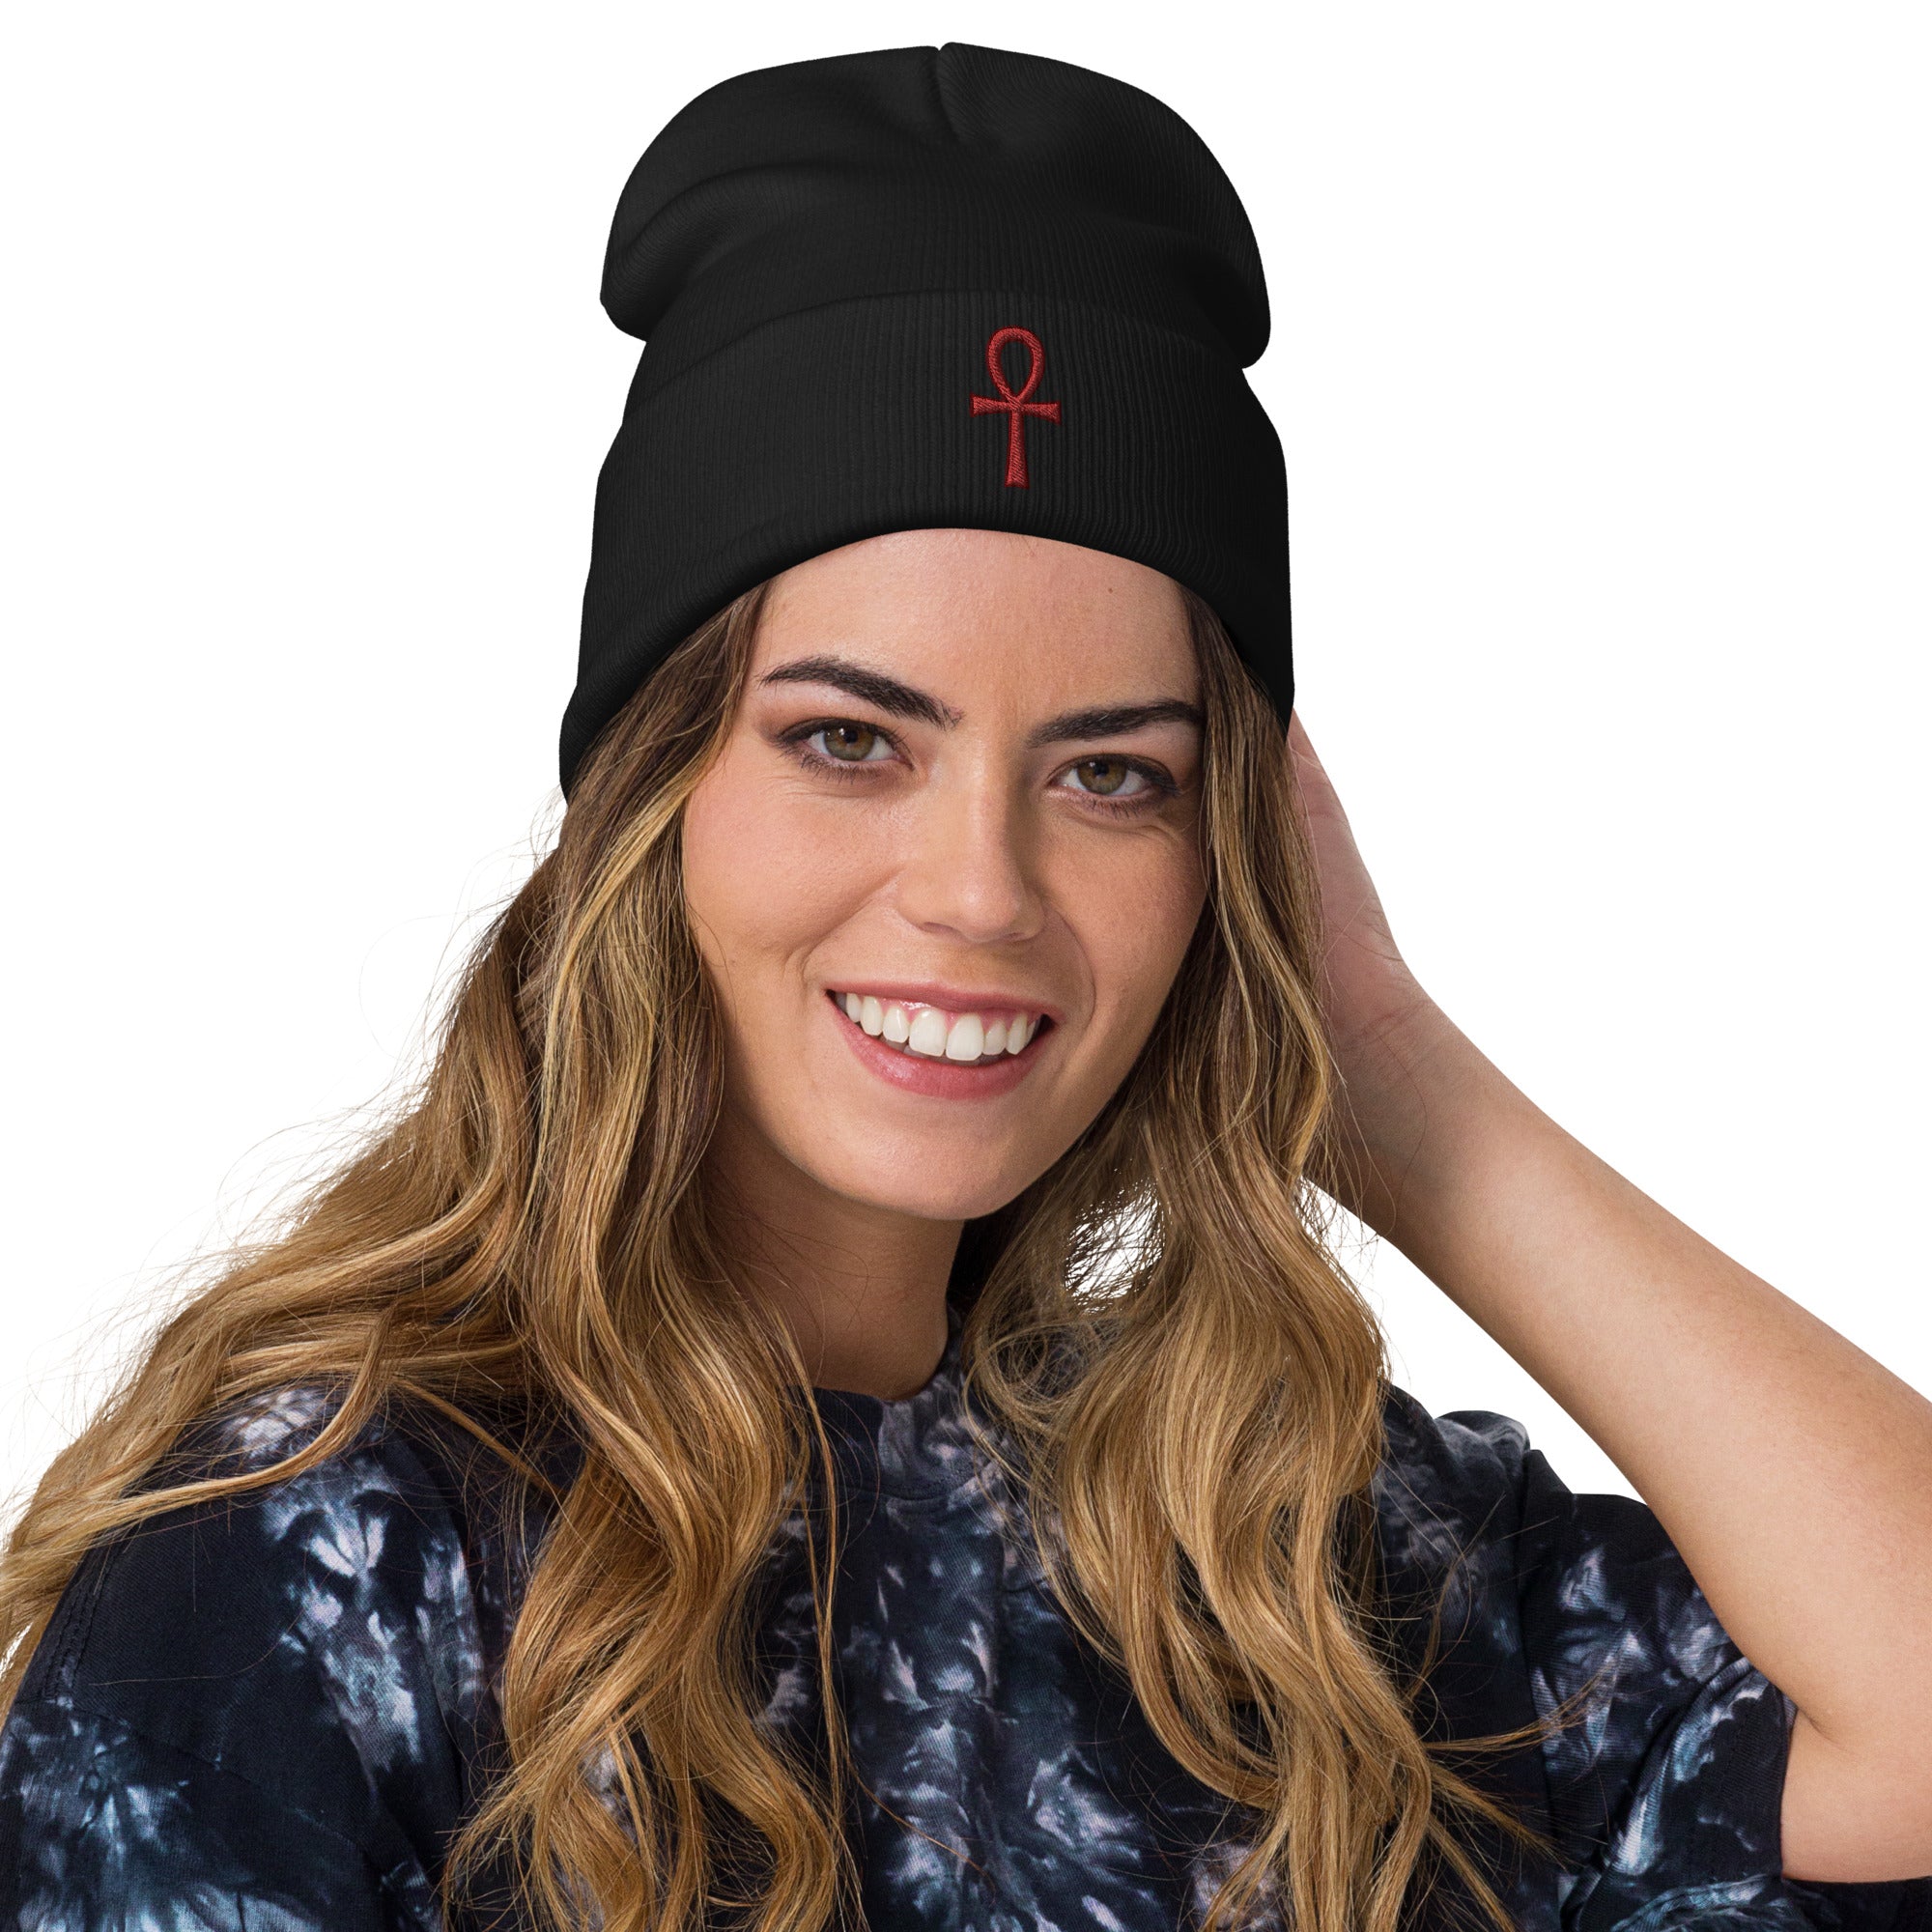 The Key of Life Ankh Ancient Egyptian Culture Embroidered Cuff Beanie Red Thread - Edge of Life Designs